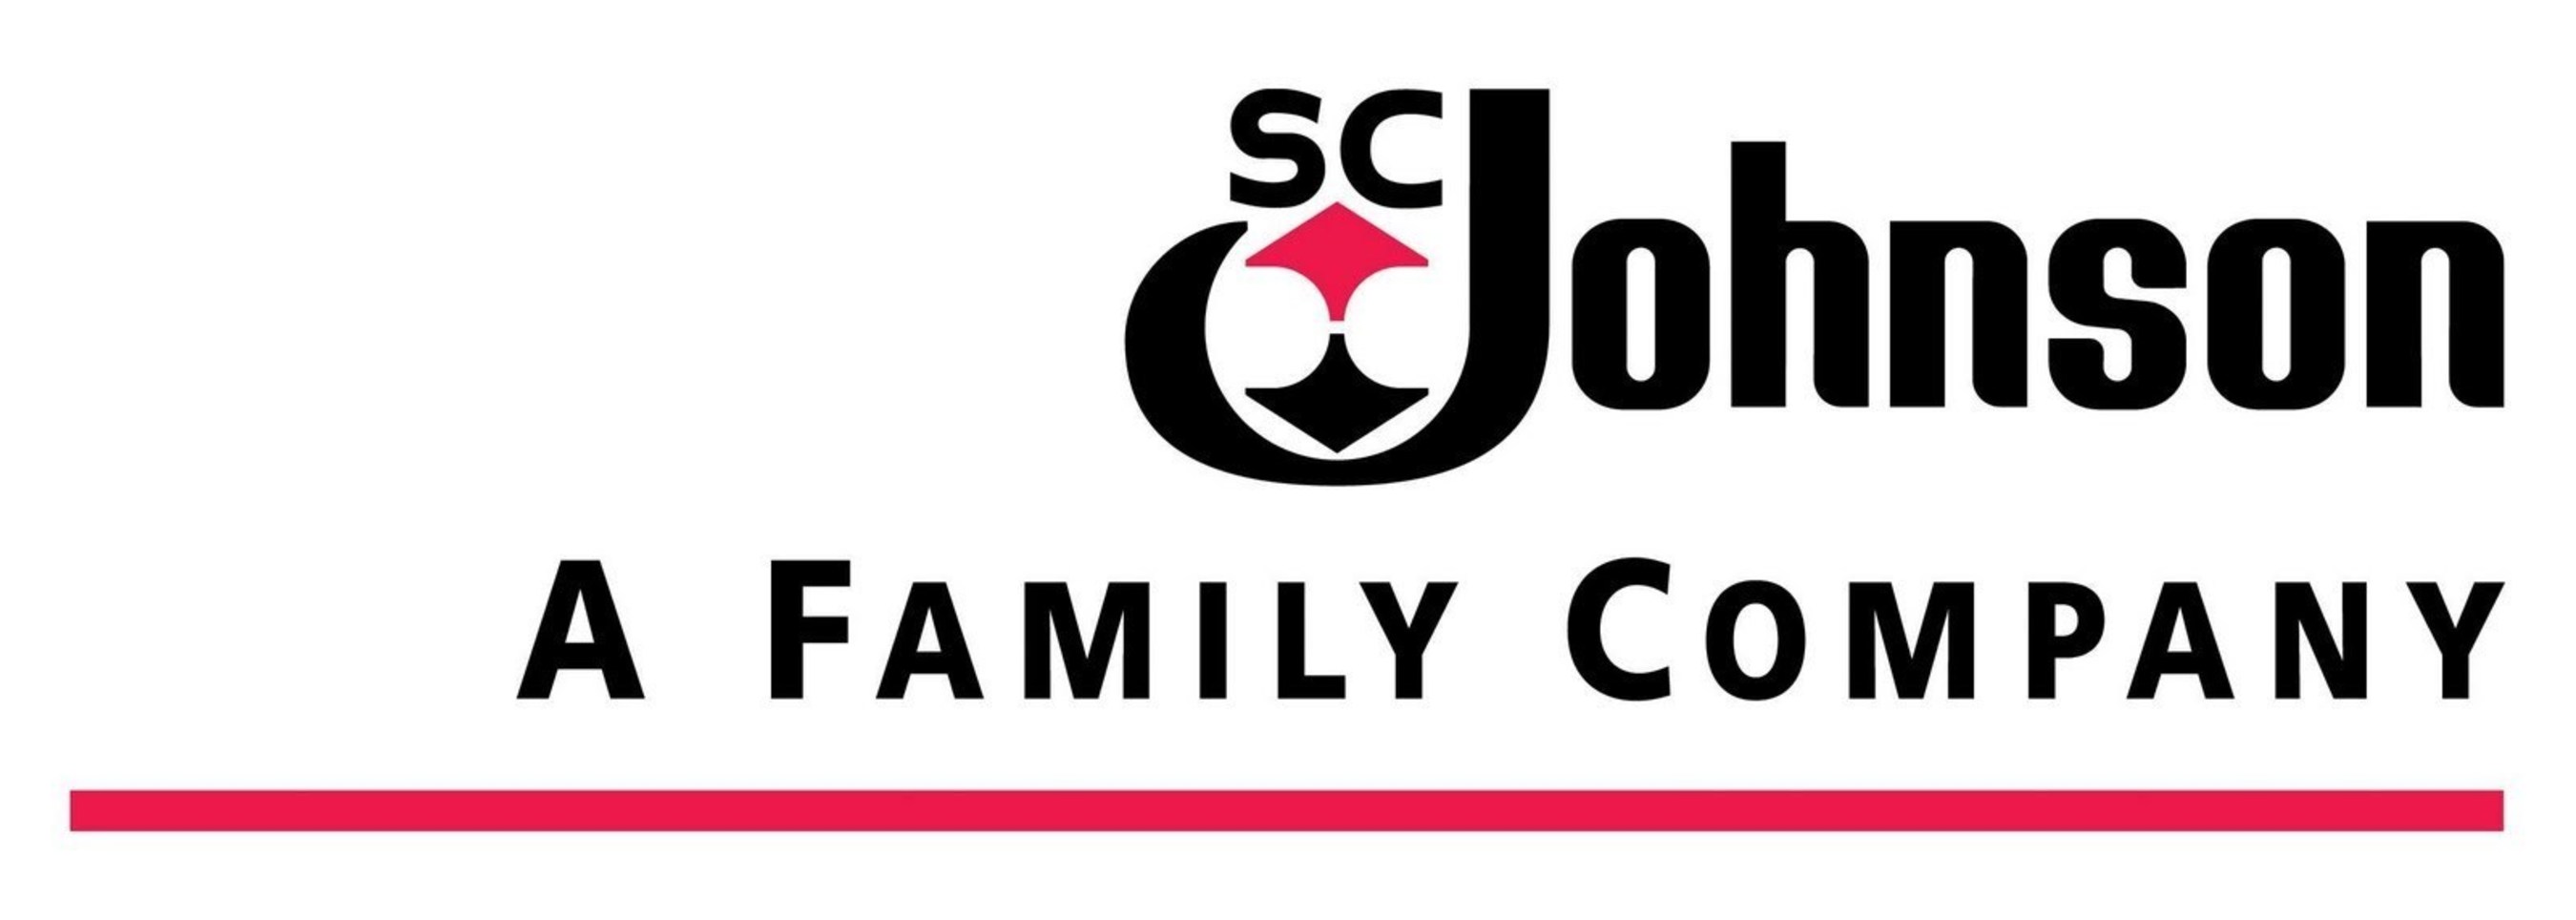 SC Johnson Selects Agency for Promotions and Shopper Marketing